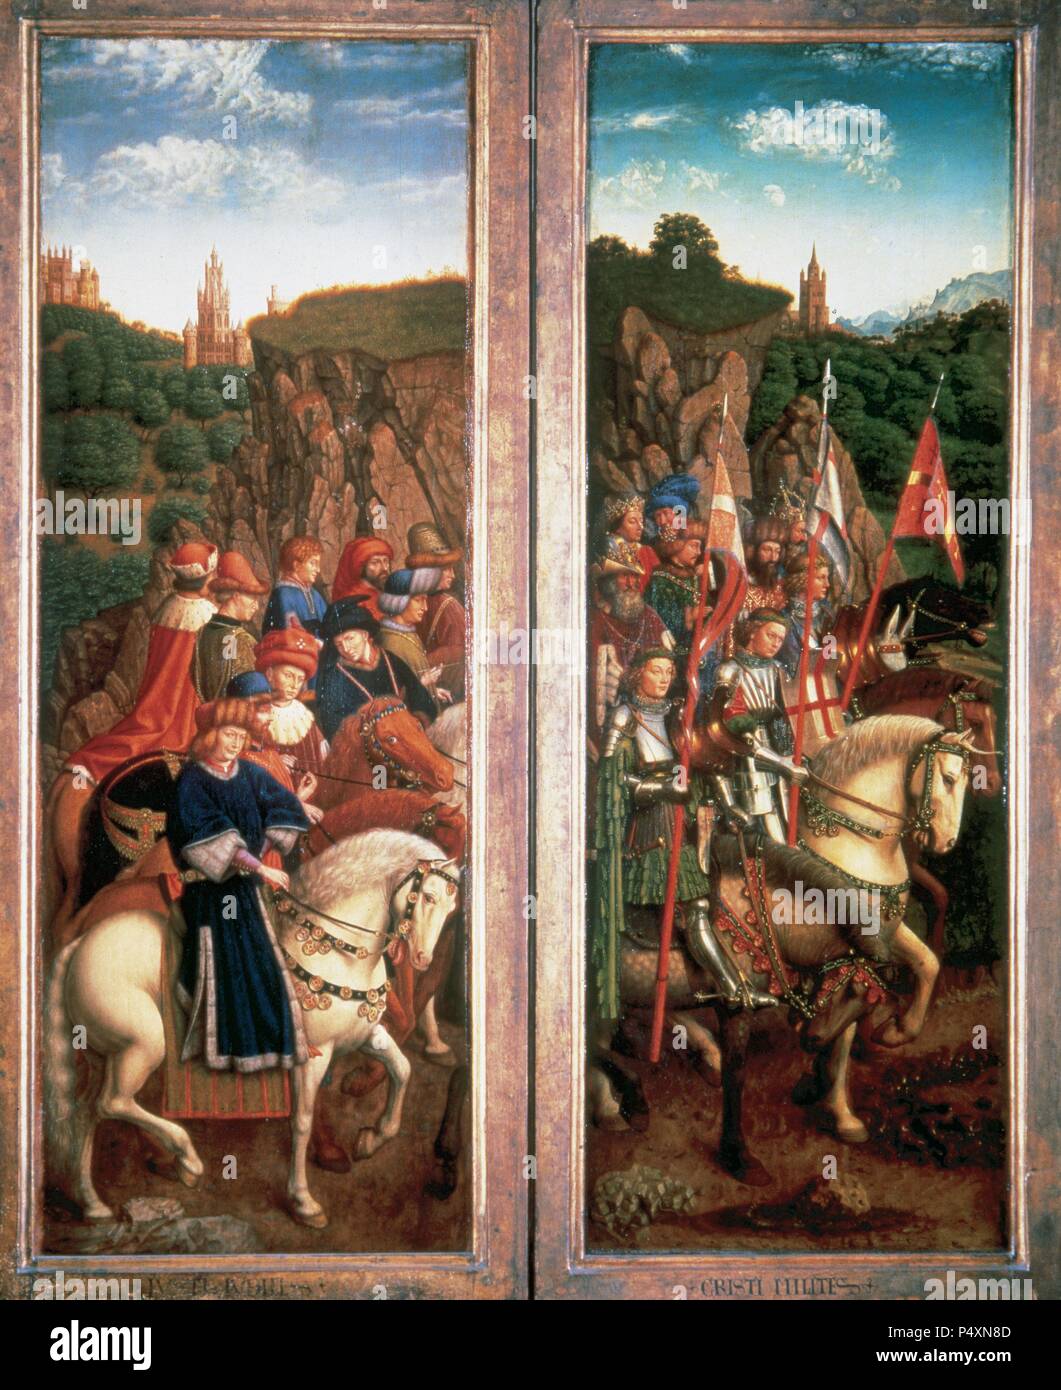 Gothic Art. Belgium. 15th Century. The Ghent Altarpiece, also known as The Adoration of the Mystic Lamb or The Lamb of God. Early Flemish polyptych panel painting. Commisioned from Hubert van Eyck (1385/90-1426) and executed by his brother Jan van Eyck (c.1390-c.1441), 1430-32. Open view. Detail. Lower left panel. Just Judges and the Knights of Christ. Oil on oak. Saint Bavo Cathedral. Ghent. Stock Photo